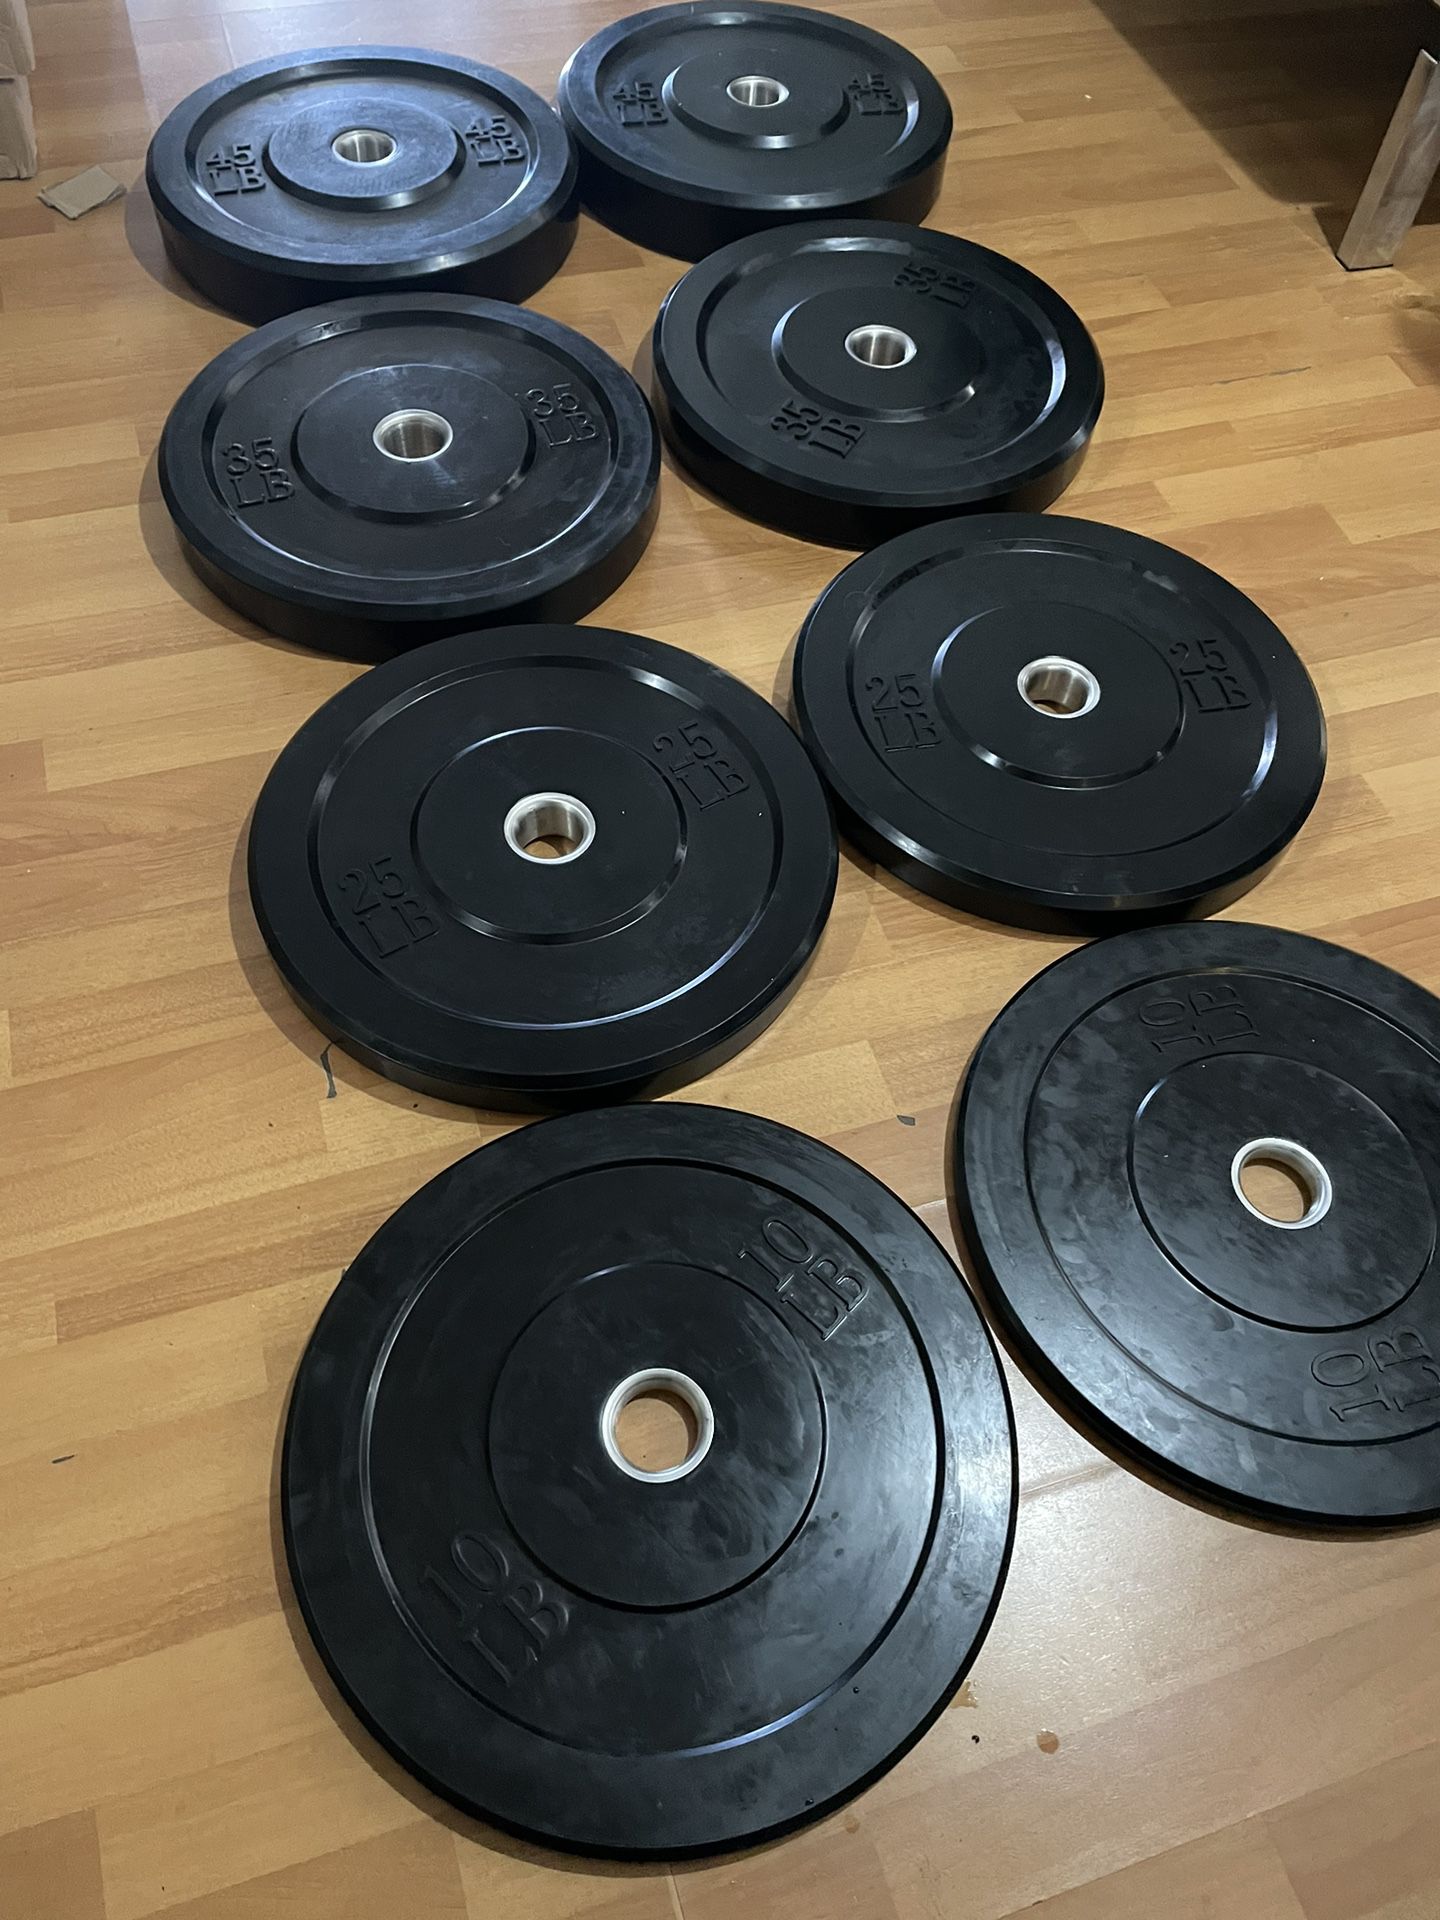 New Olympic Rubber Bumper Plates 230lbs | 7ft 45lbs Olympic Barbell W/ Clips | New in Boxes | Gym Equipment|